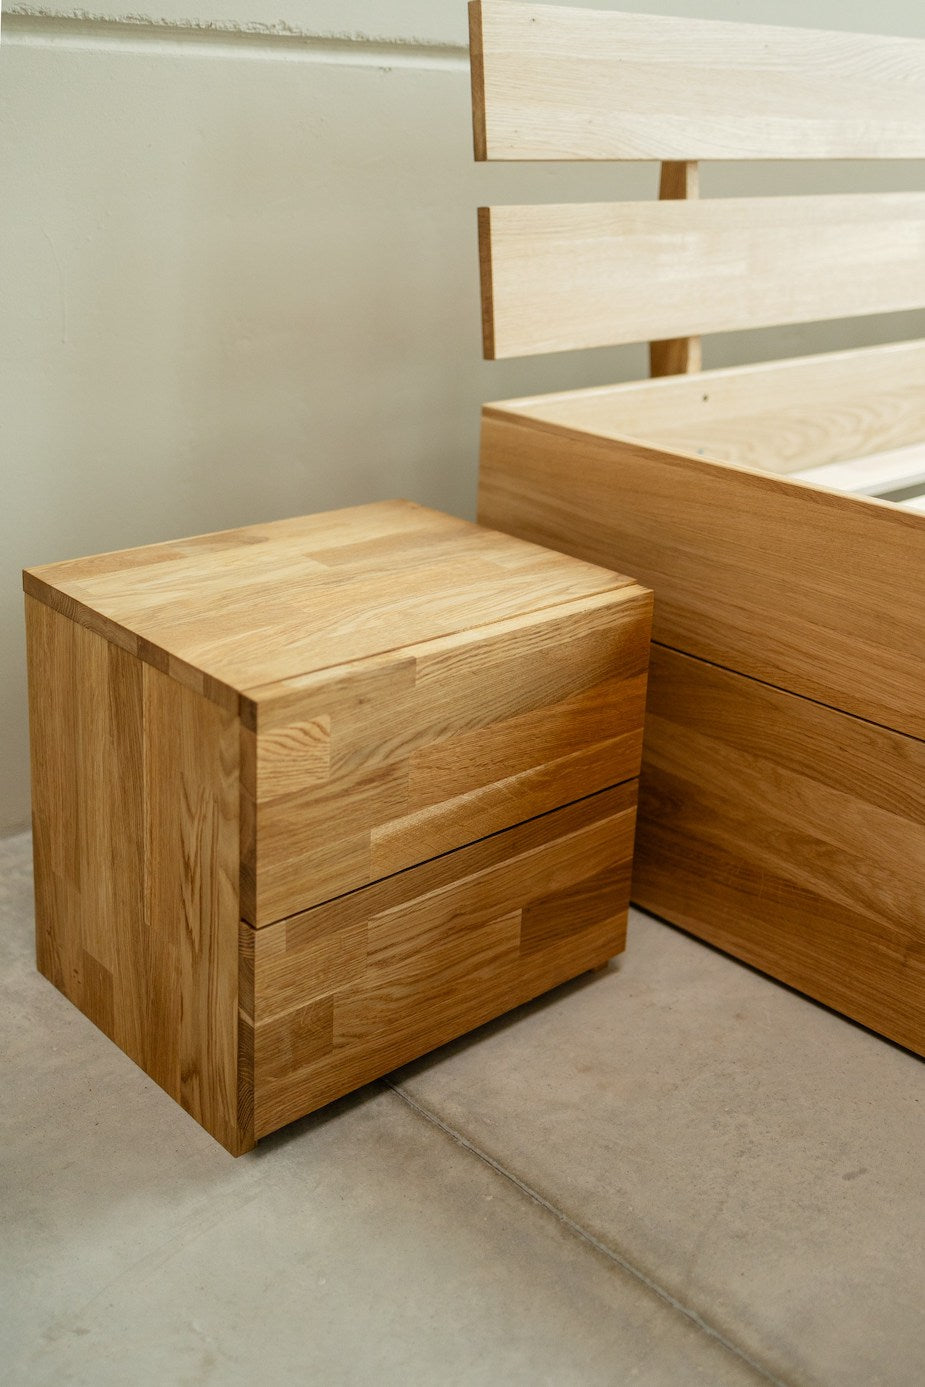 NordicStory Bedside table in solid sustainable oak wood